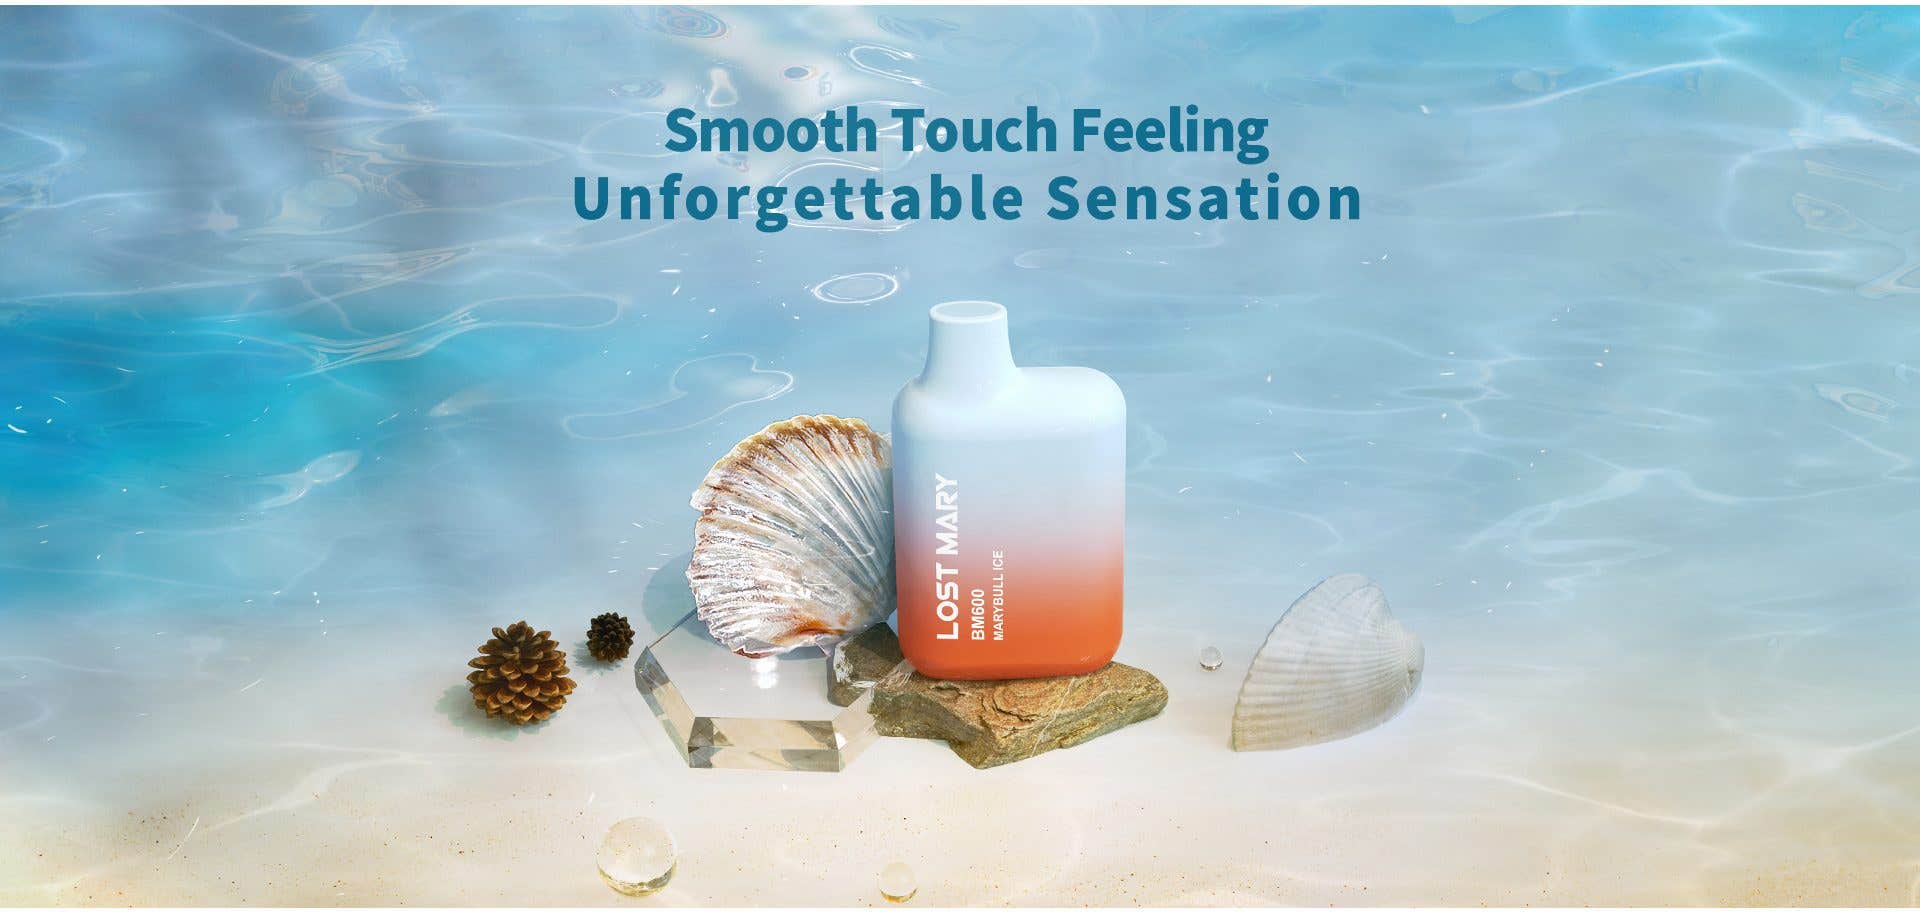 Smooth touch feeling, unforgettable sensation.